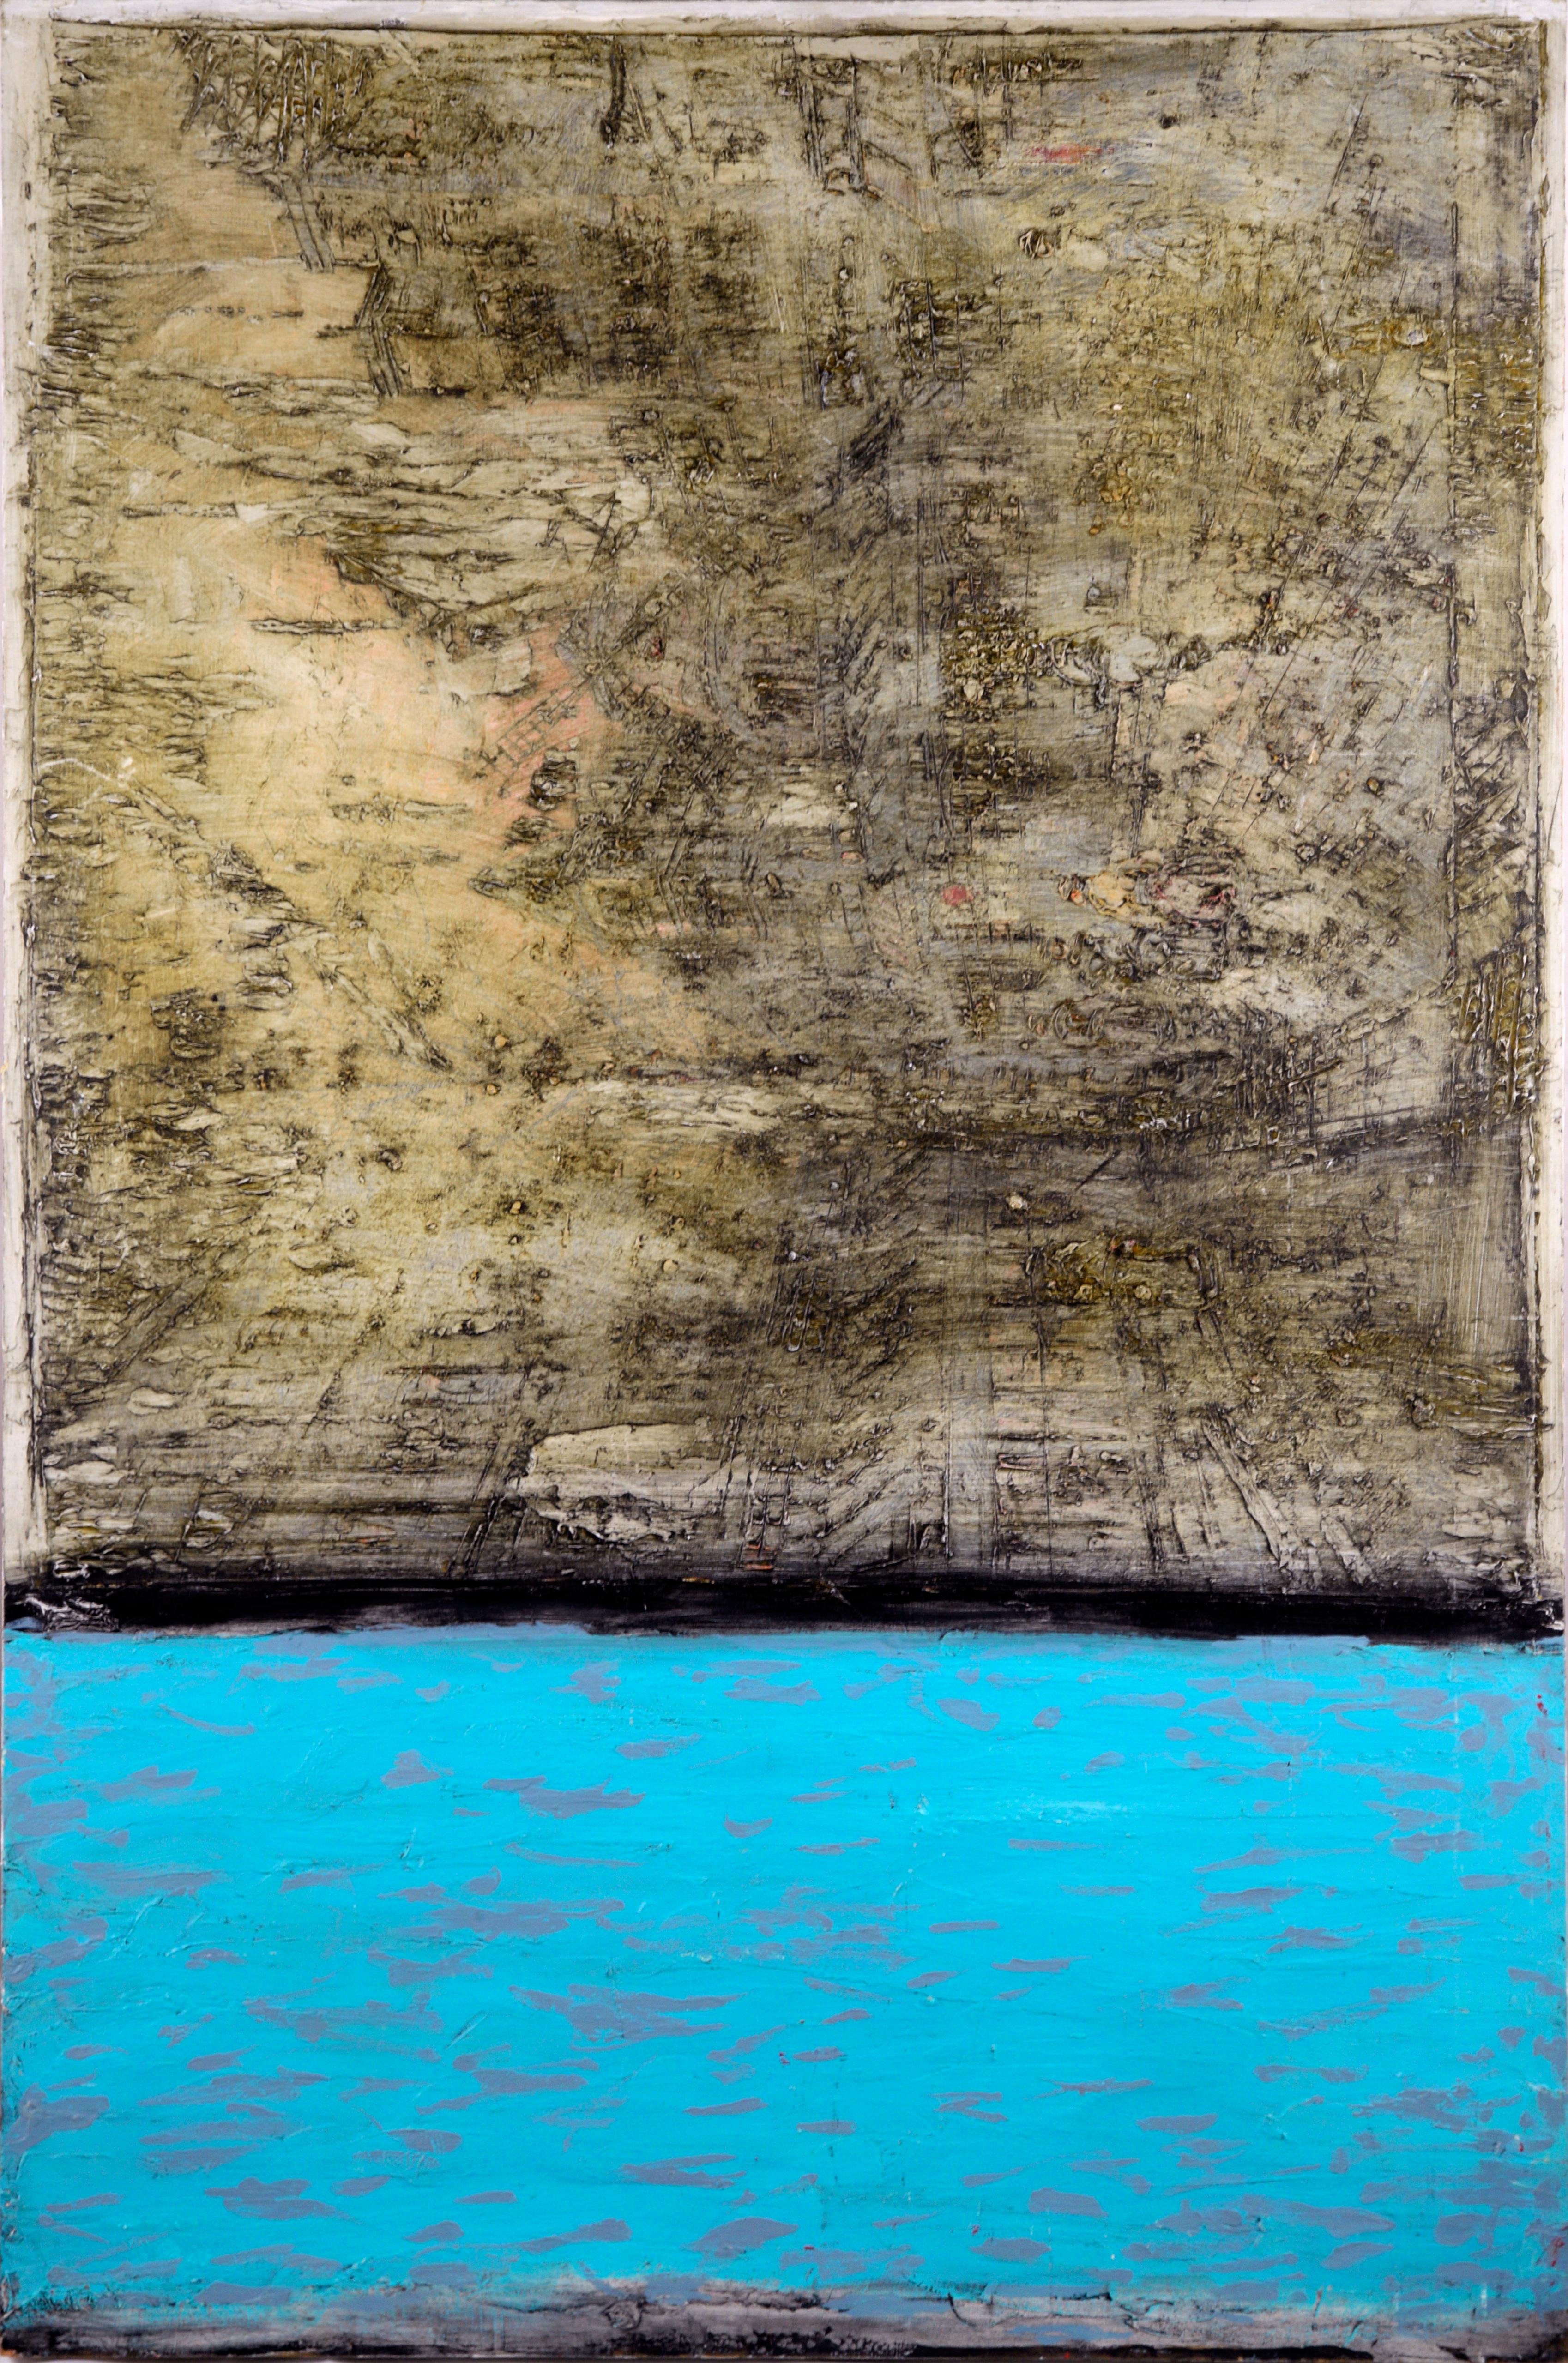 Michael Pauker  Abstract Painting - "Moulin Rouge", Contemporary Aquamarine & Grey Two-Toned Colorfield Abstract